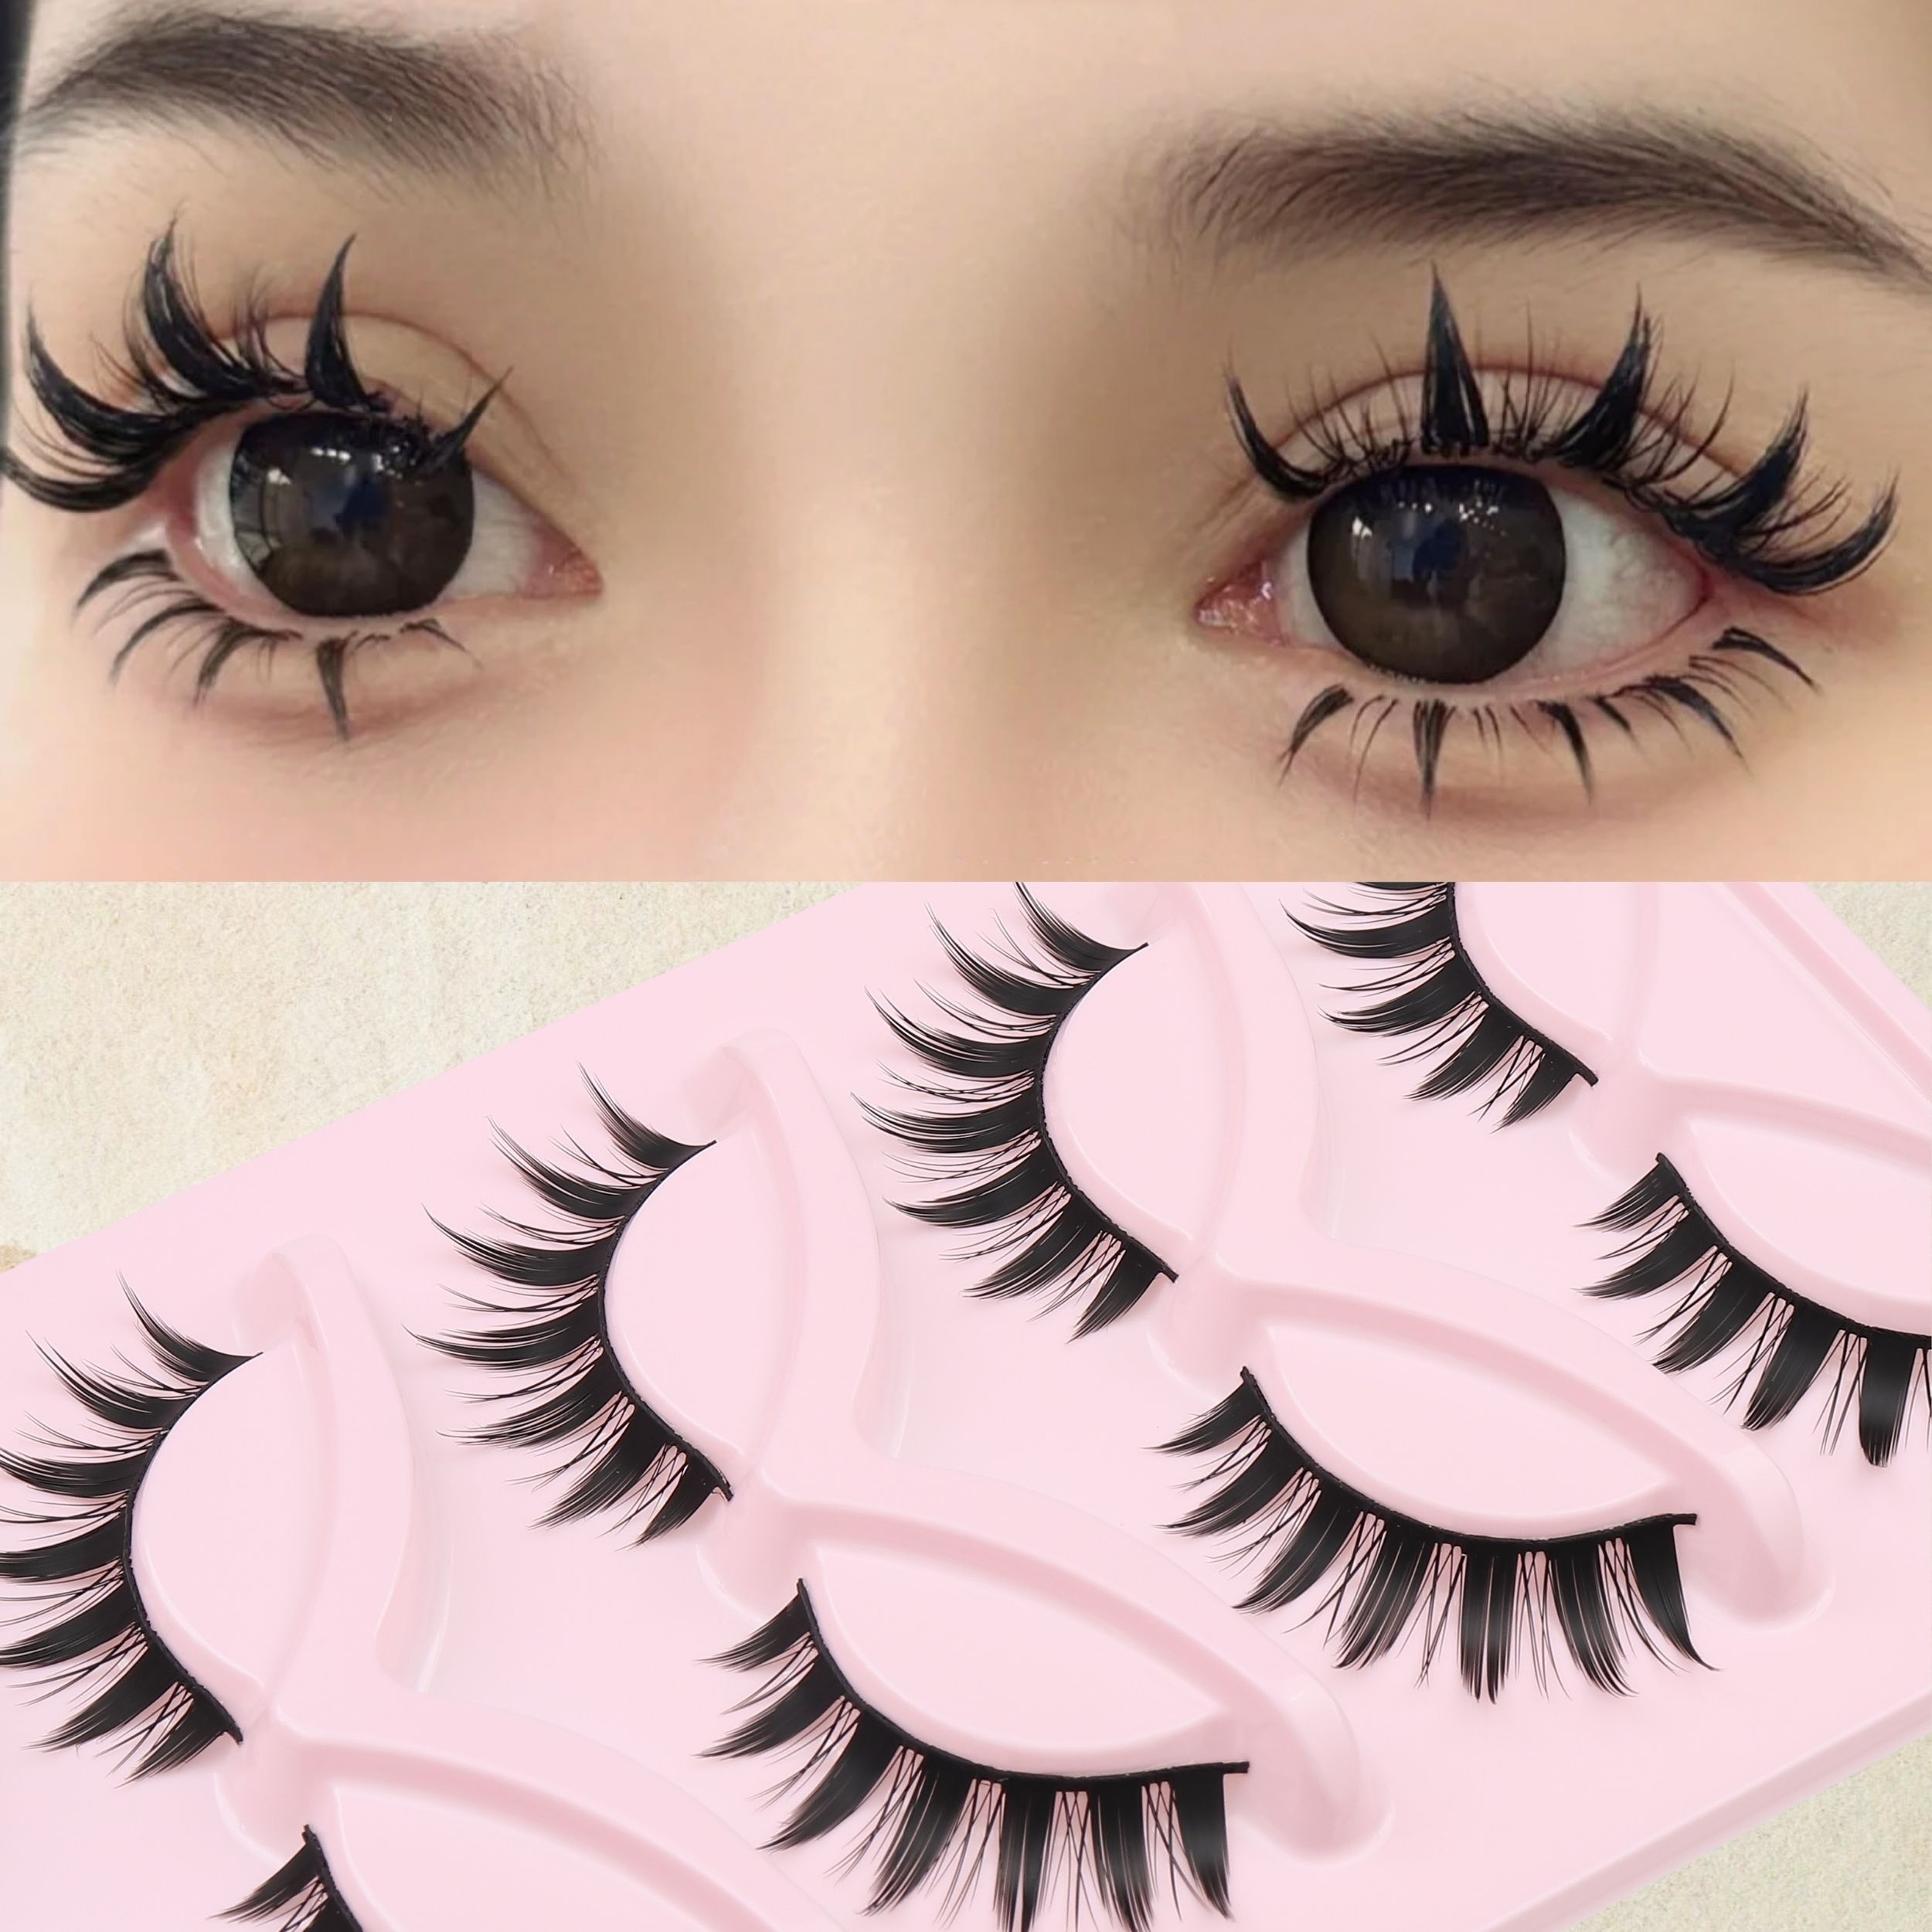 

5 Pairs Manga-inspired False Eyelashes - Full Strip, Wispy & Thick For Cosplay, Anime, And Natural Looks - Easy To Apply & Reusable